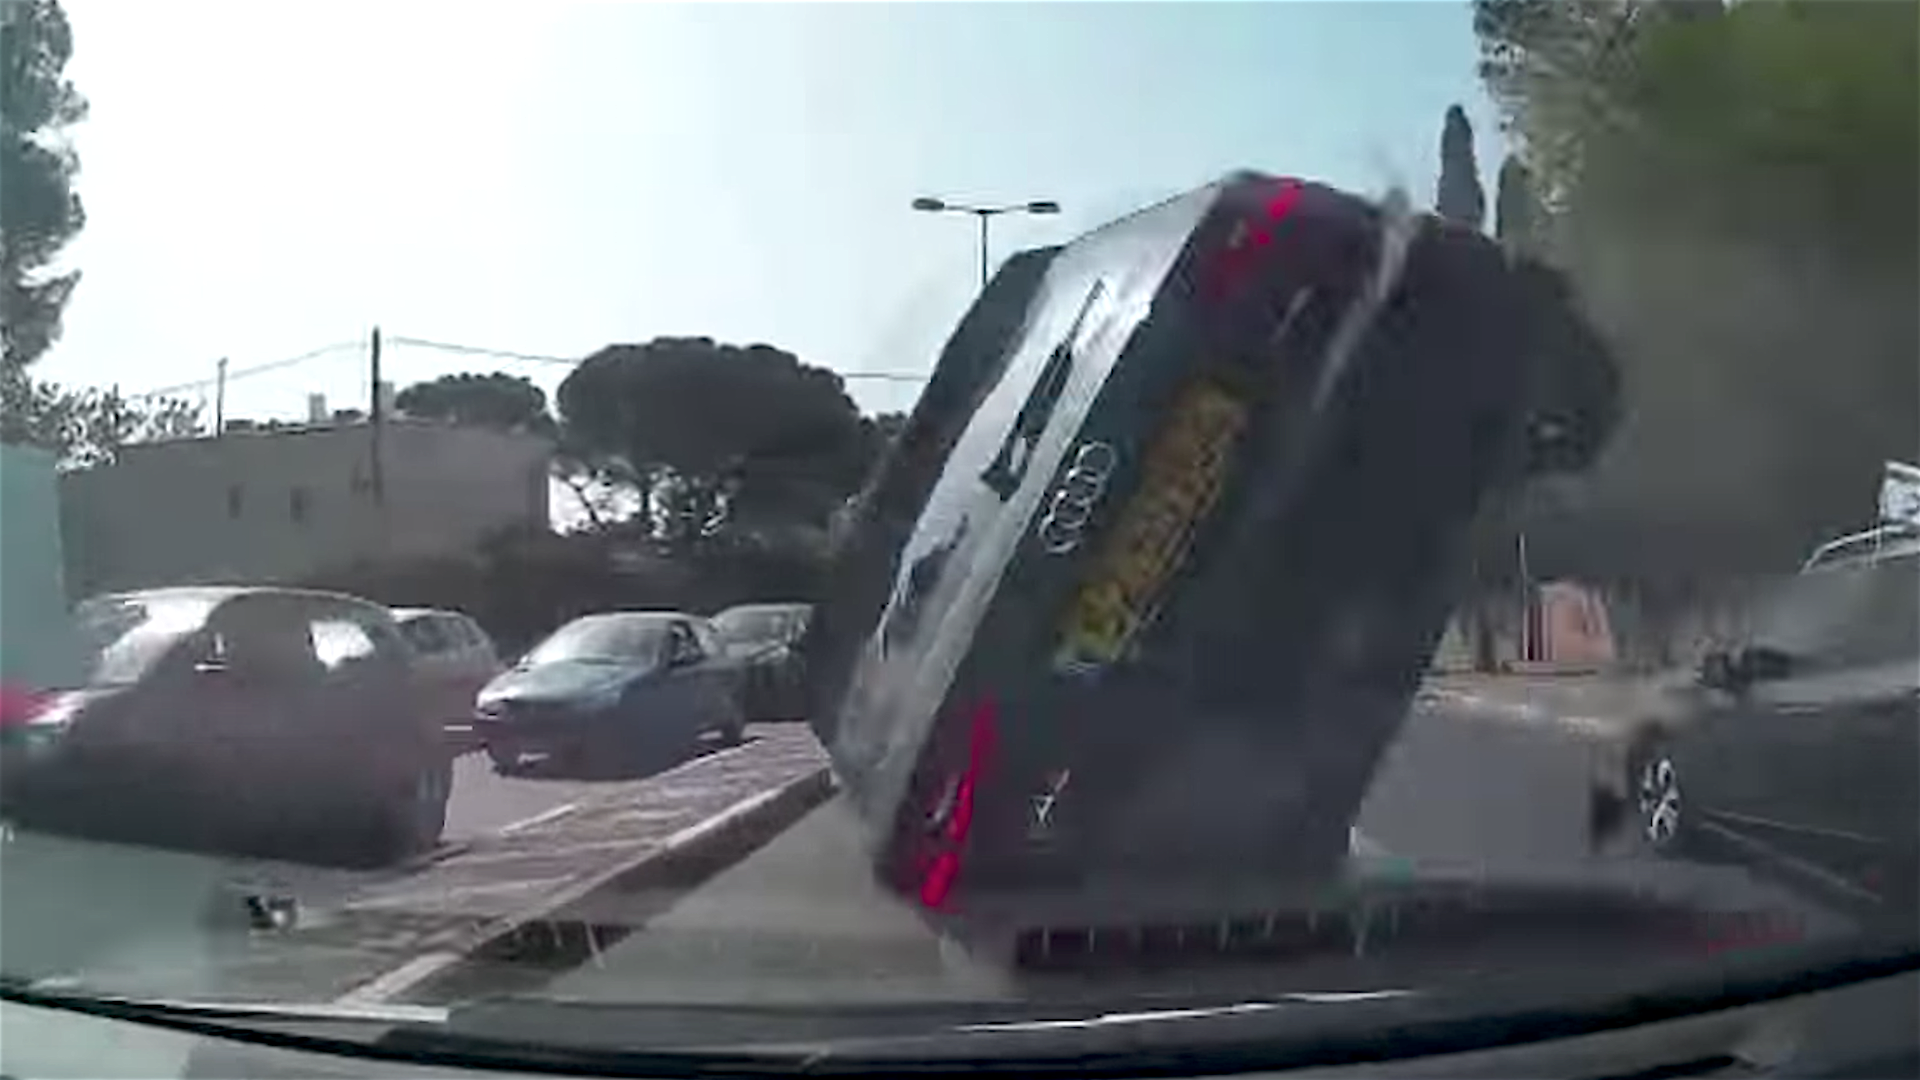 Watch an Audi A3 Flip and Burst Into Flames After a Bad Lane Change